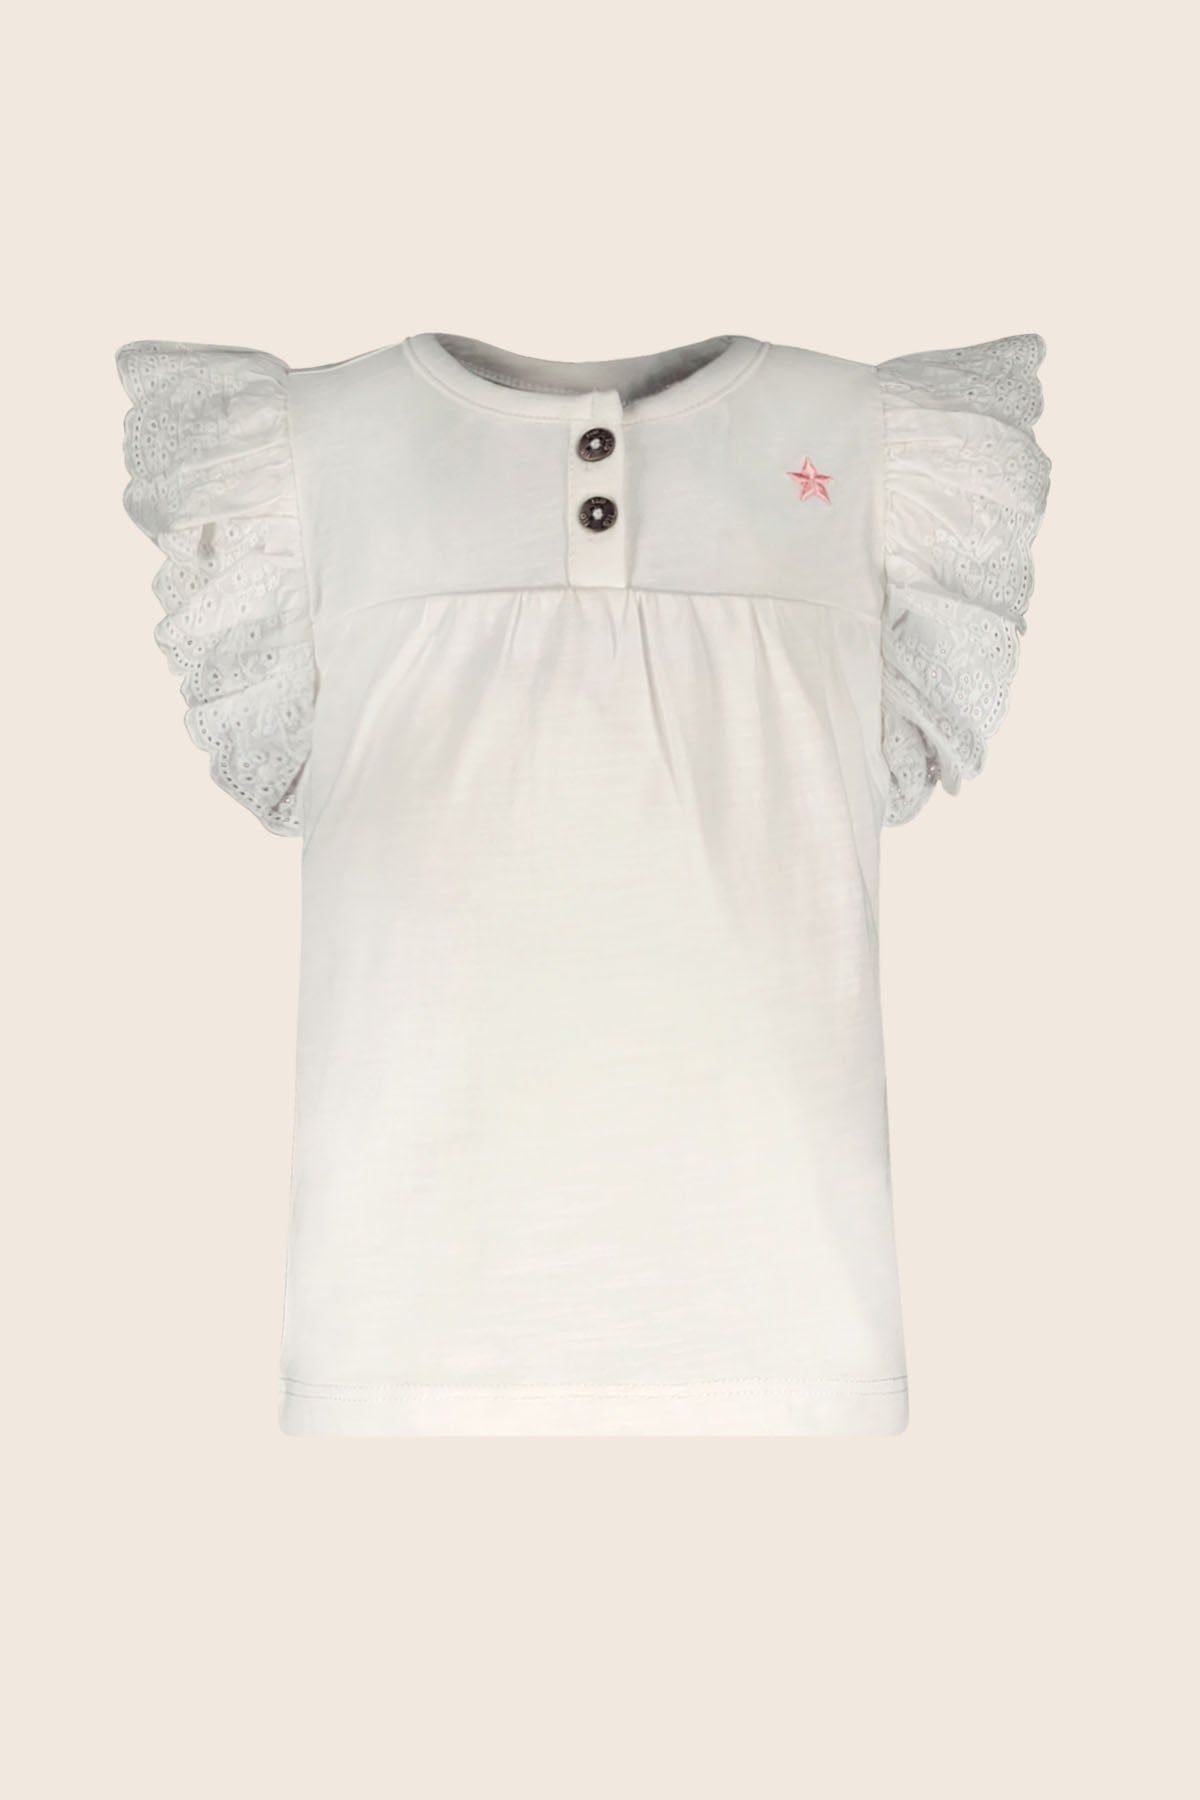 T-Shirt Top GISELLE off white